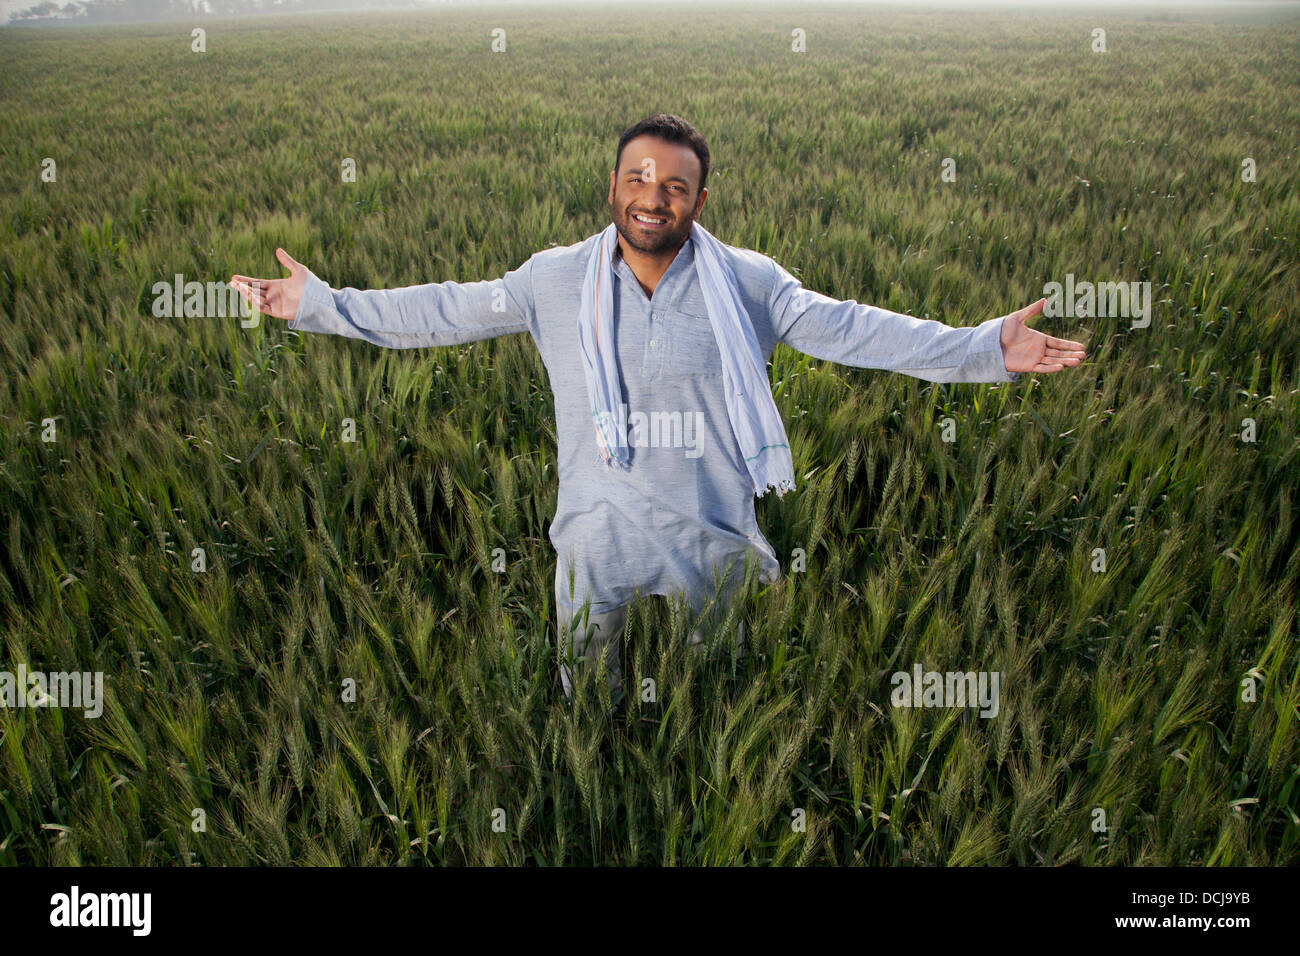 Portrait of an Indian man standing with arms out in a field Stock Photo